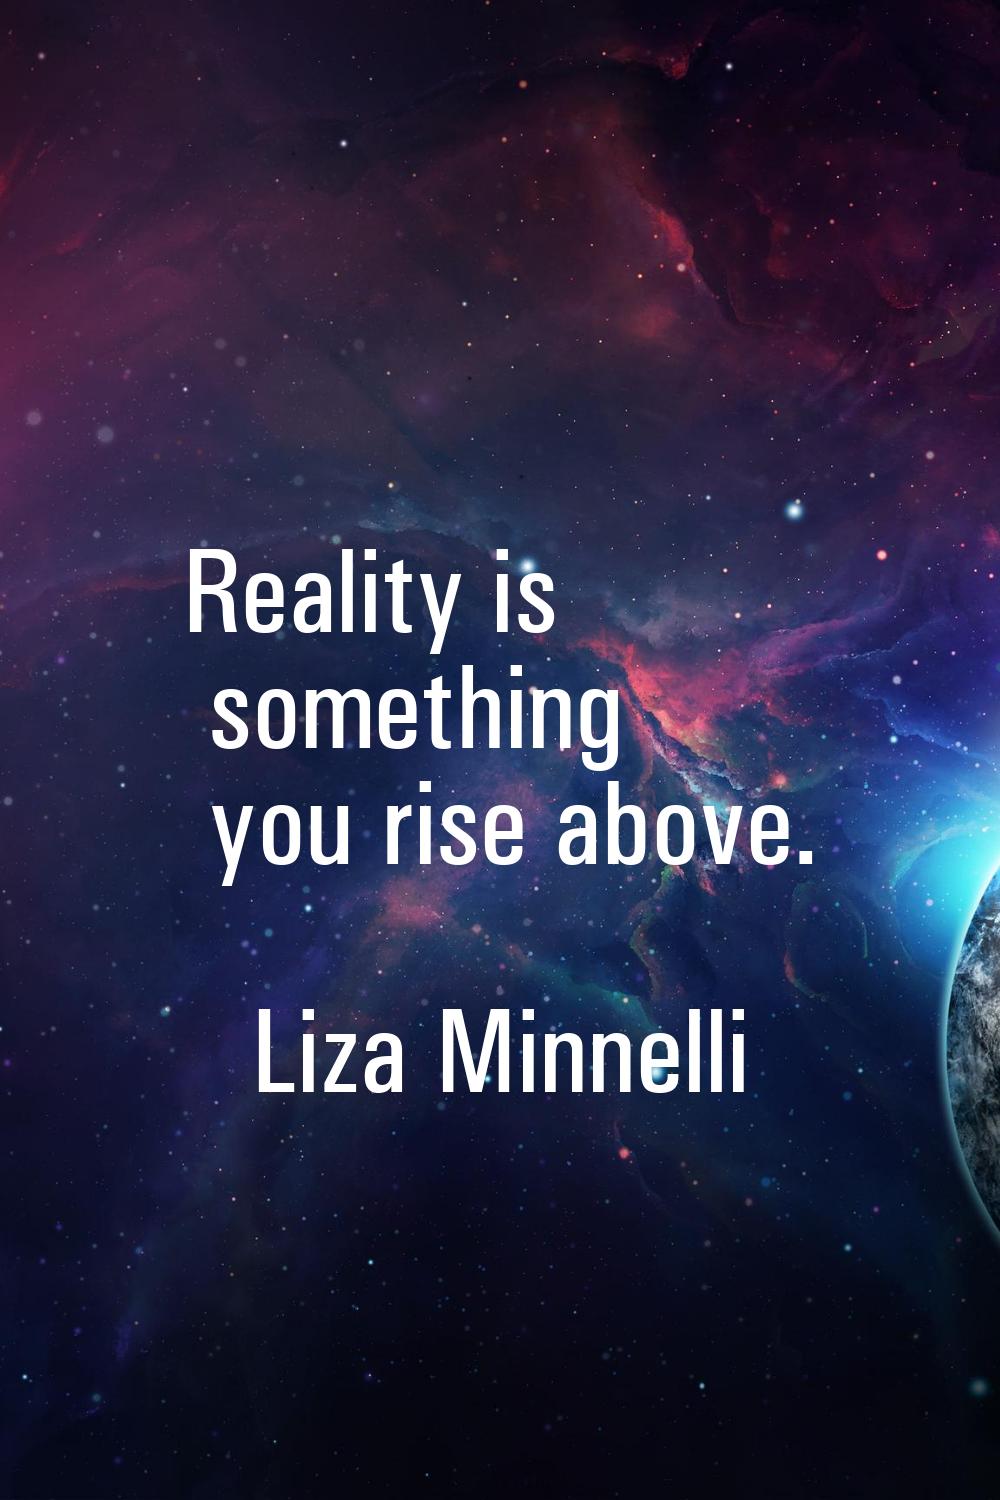 Reality is something you rise above.